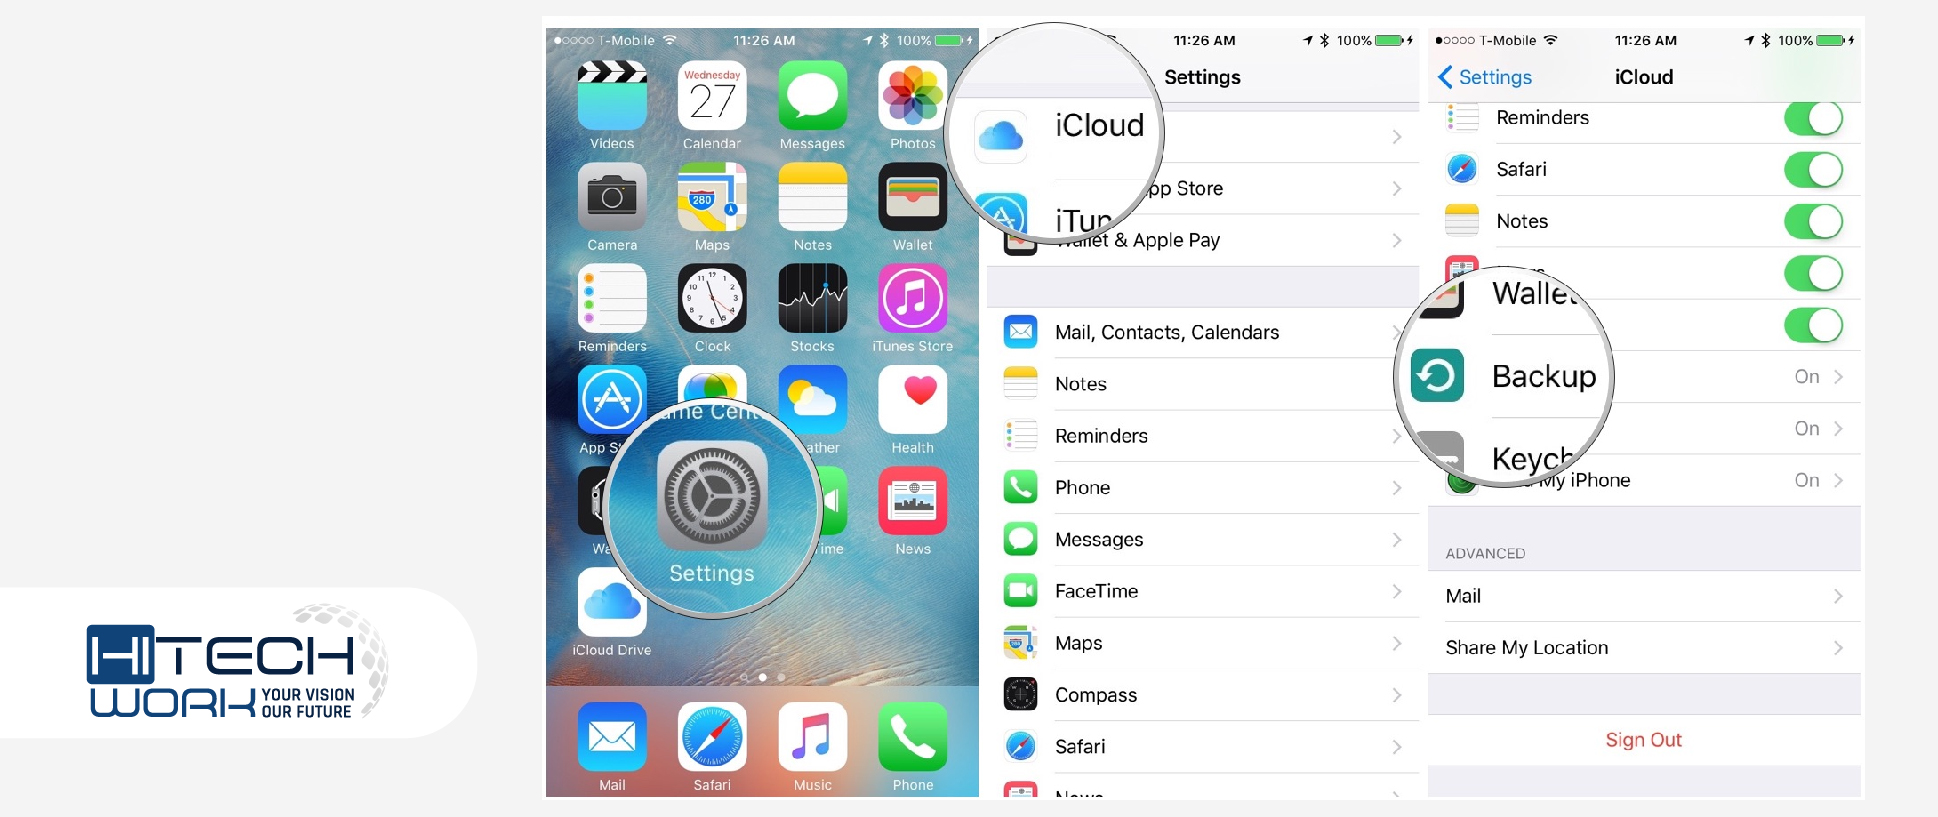 How to Create Backups on iOS Devices Via iCloud